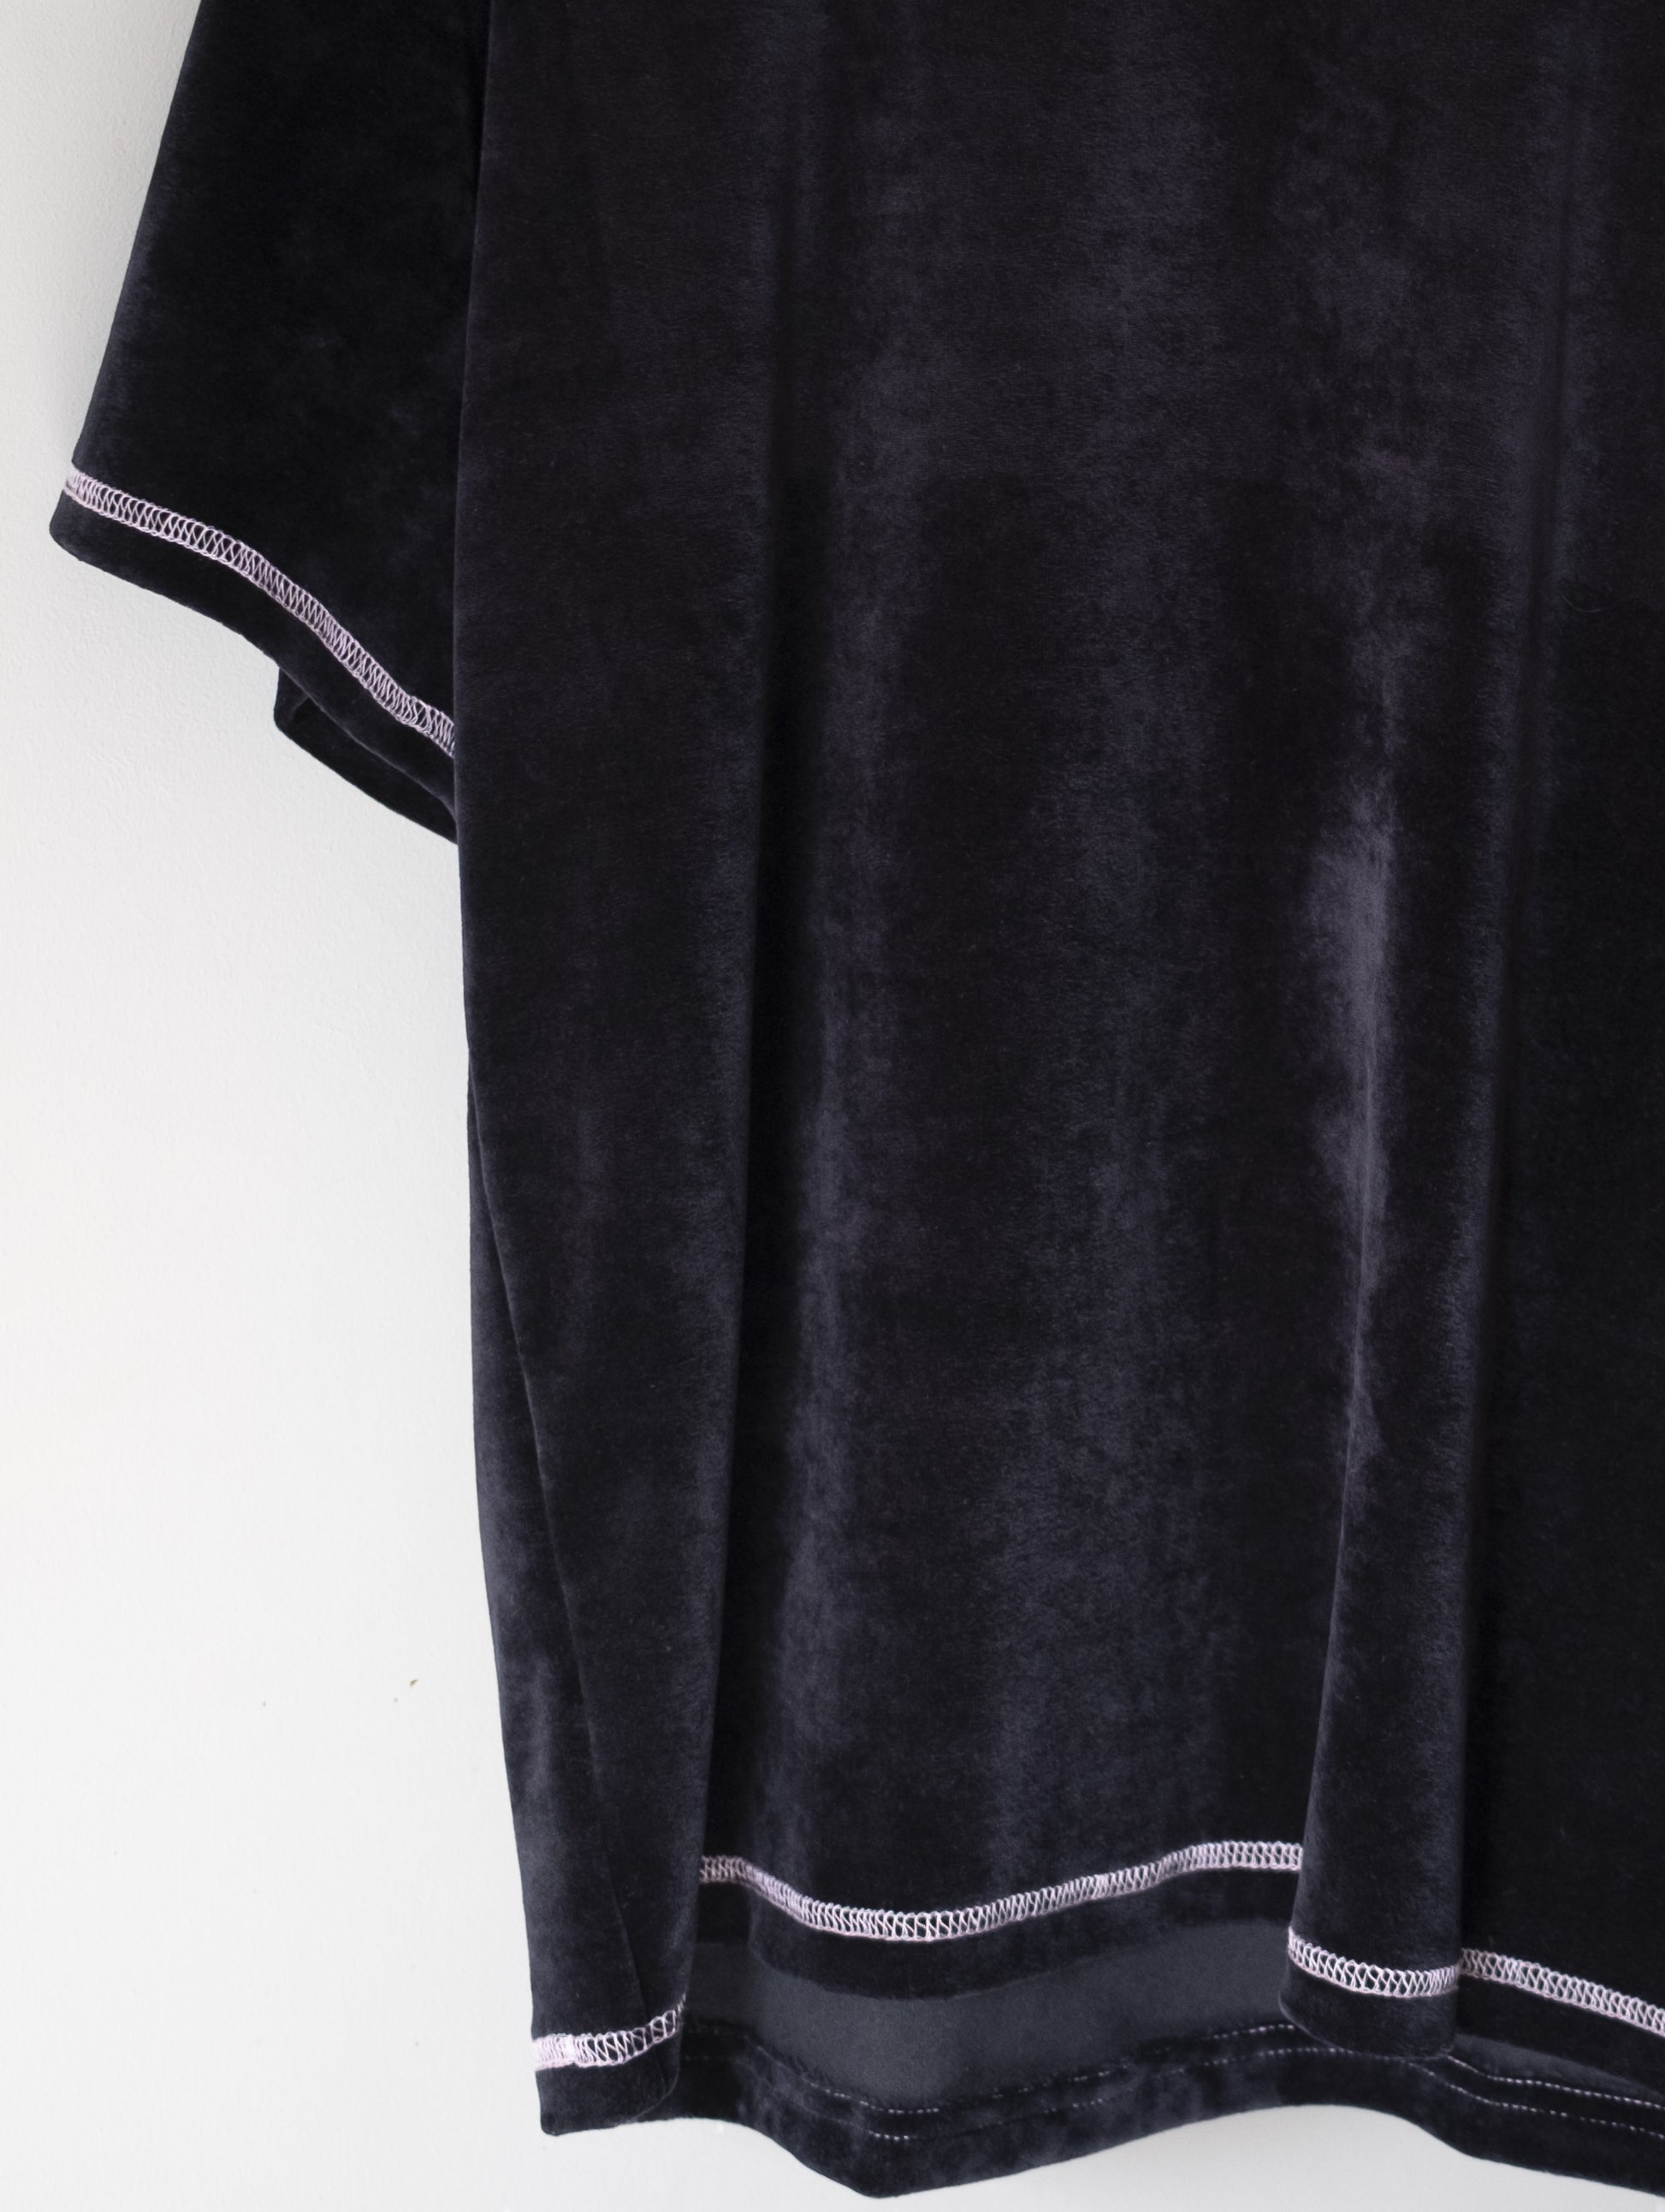 black velour t-shirt with pale pink contrast overstitch detail